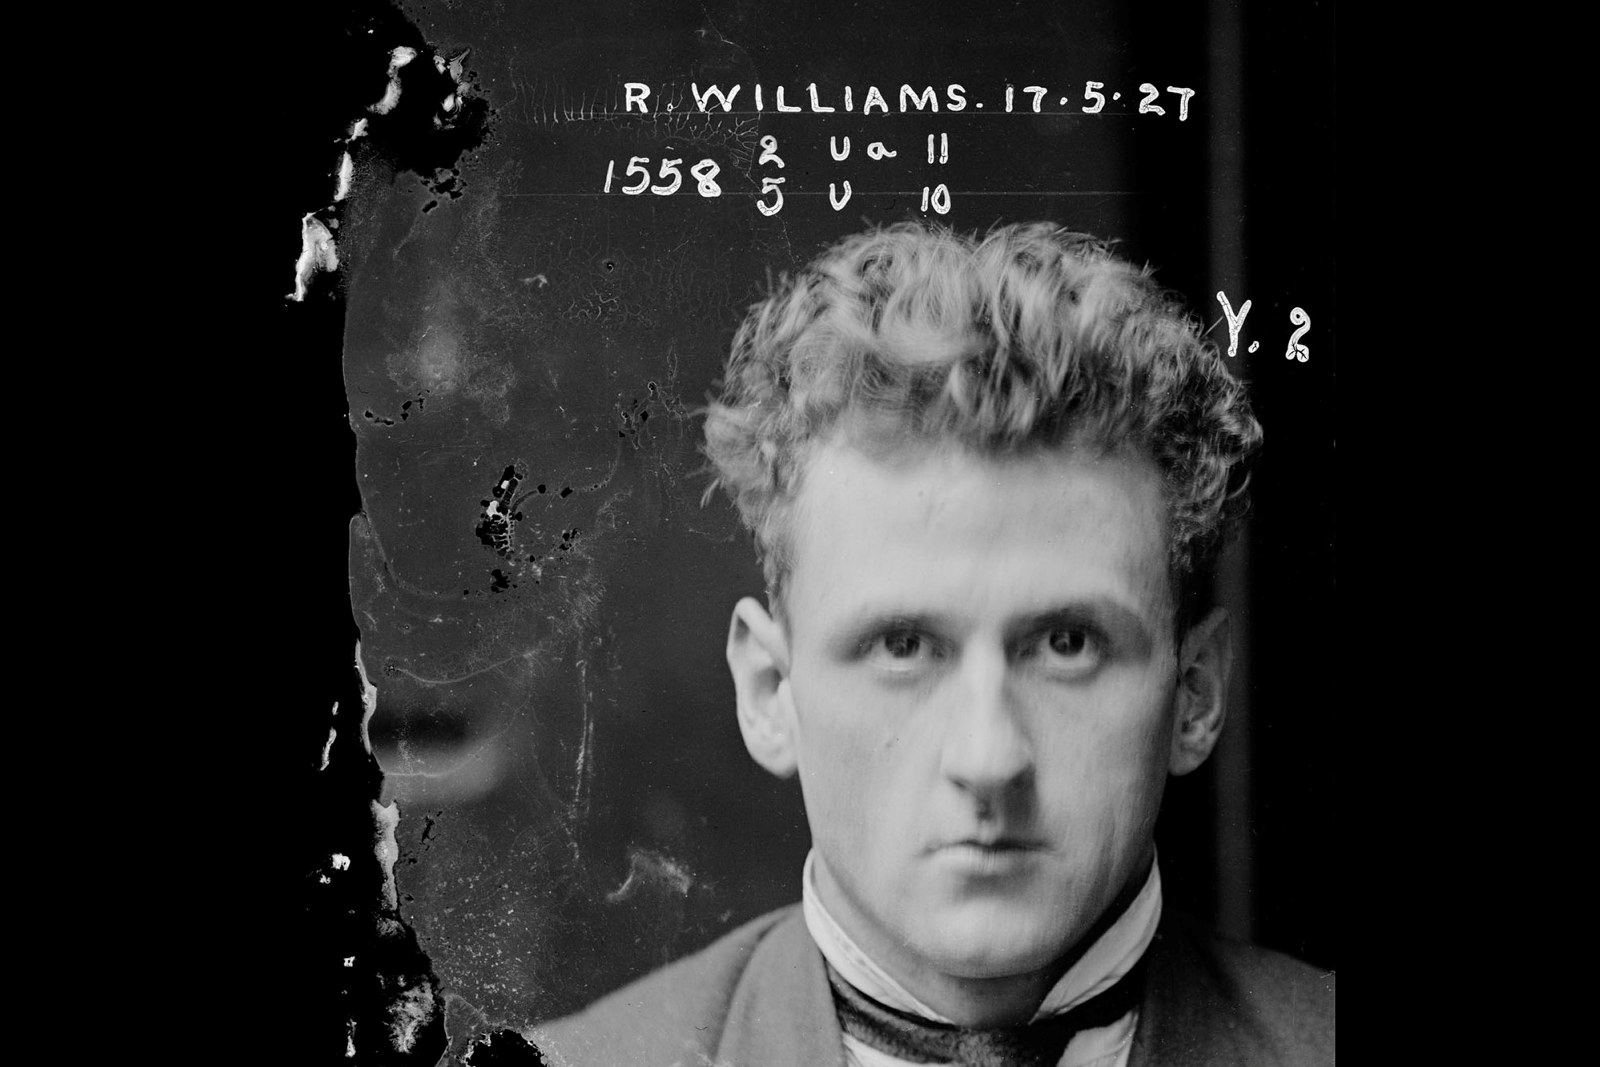 Black and white photo of man's face with white writing on negative visible to one side.